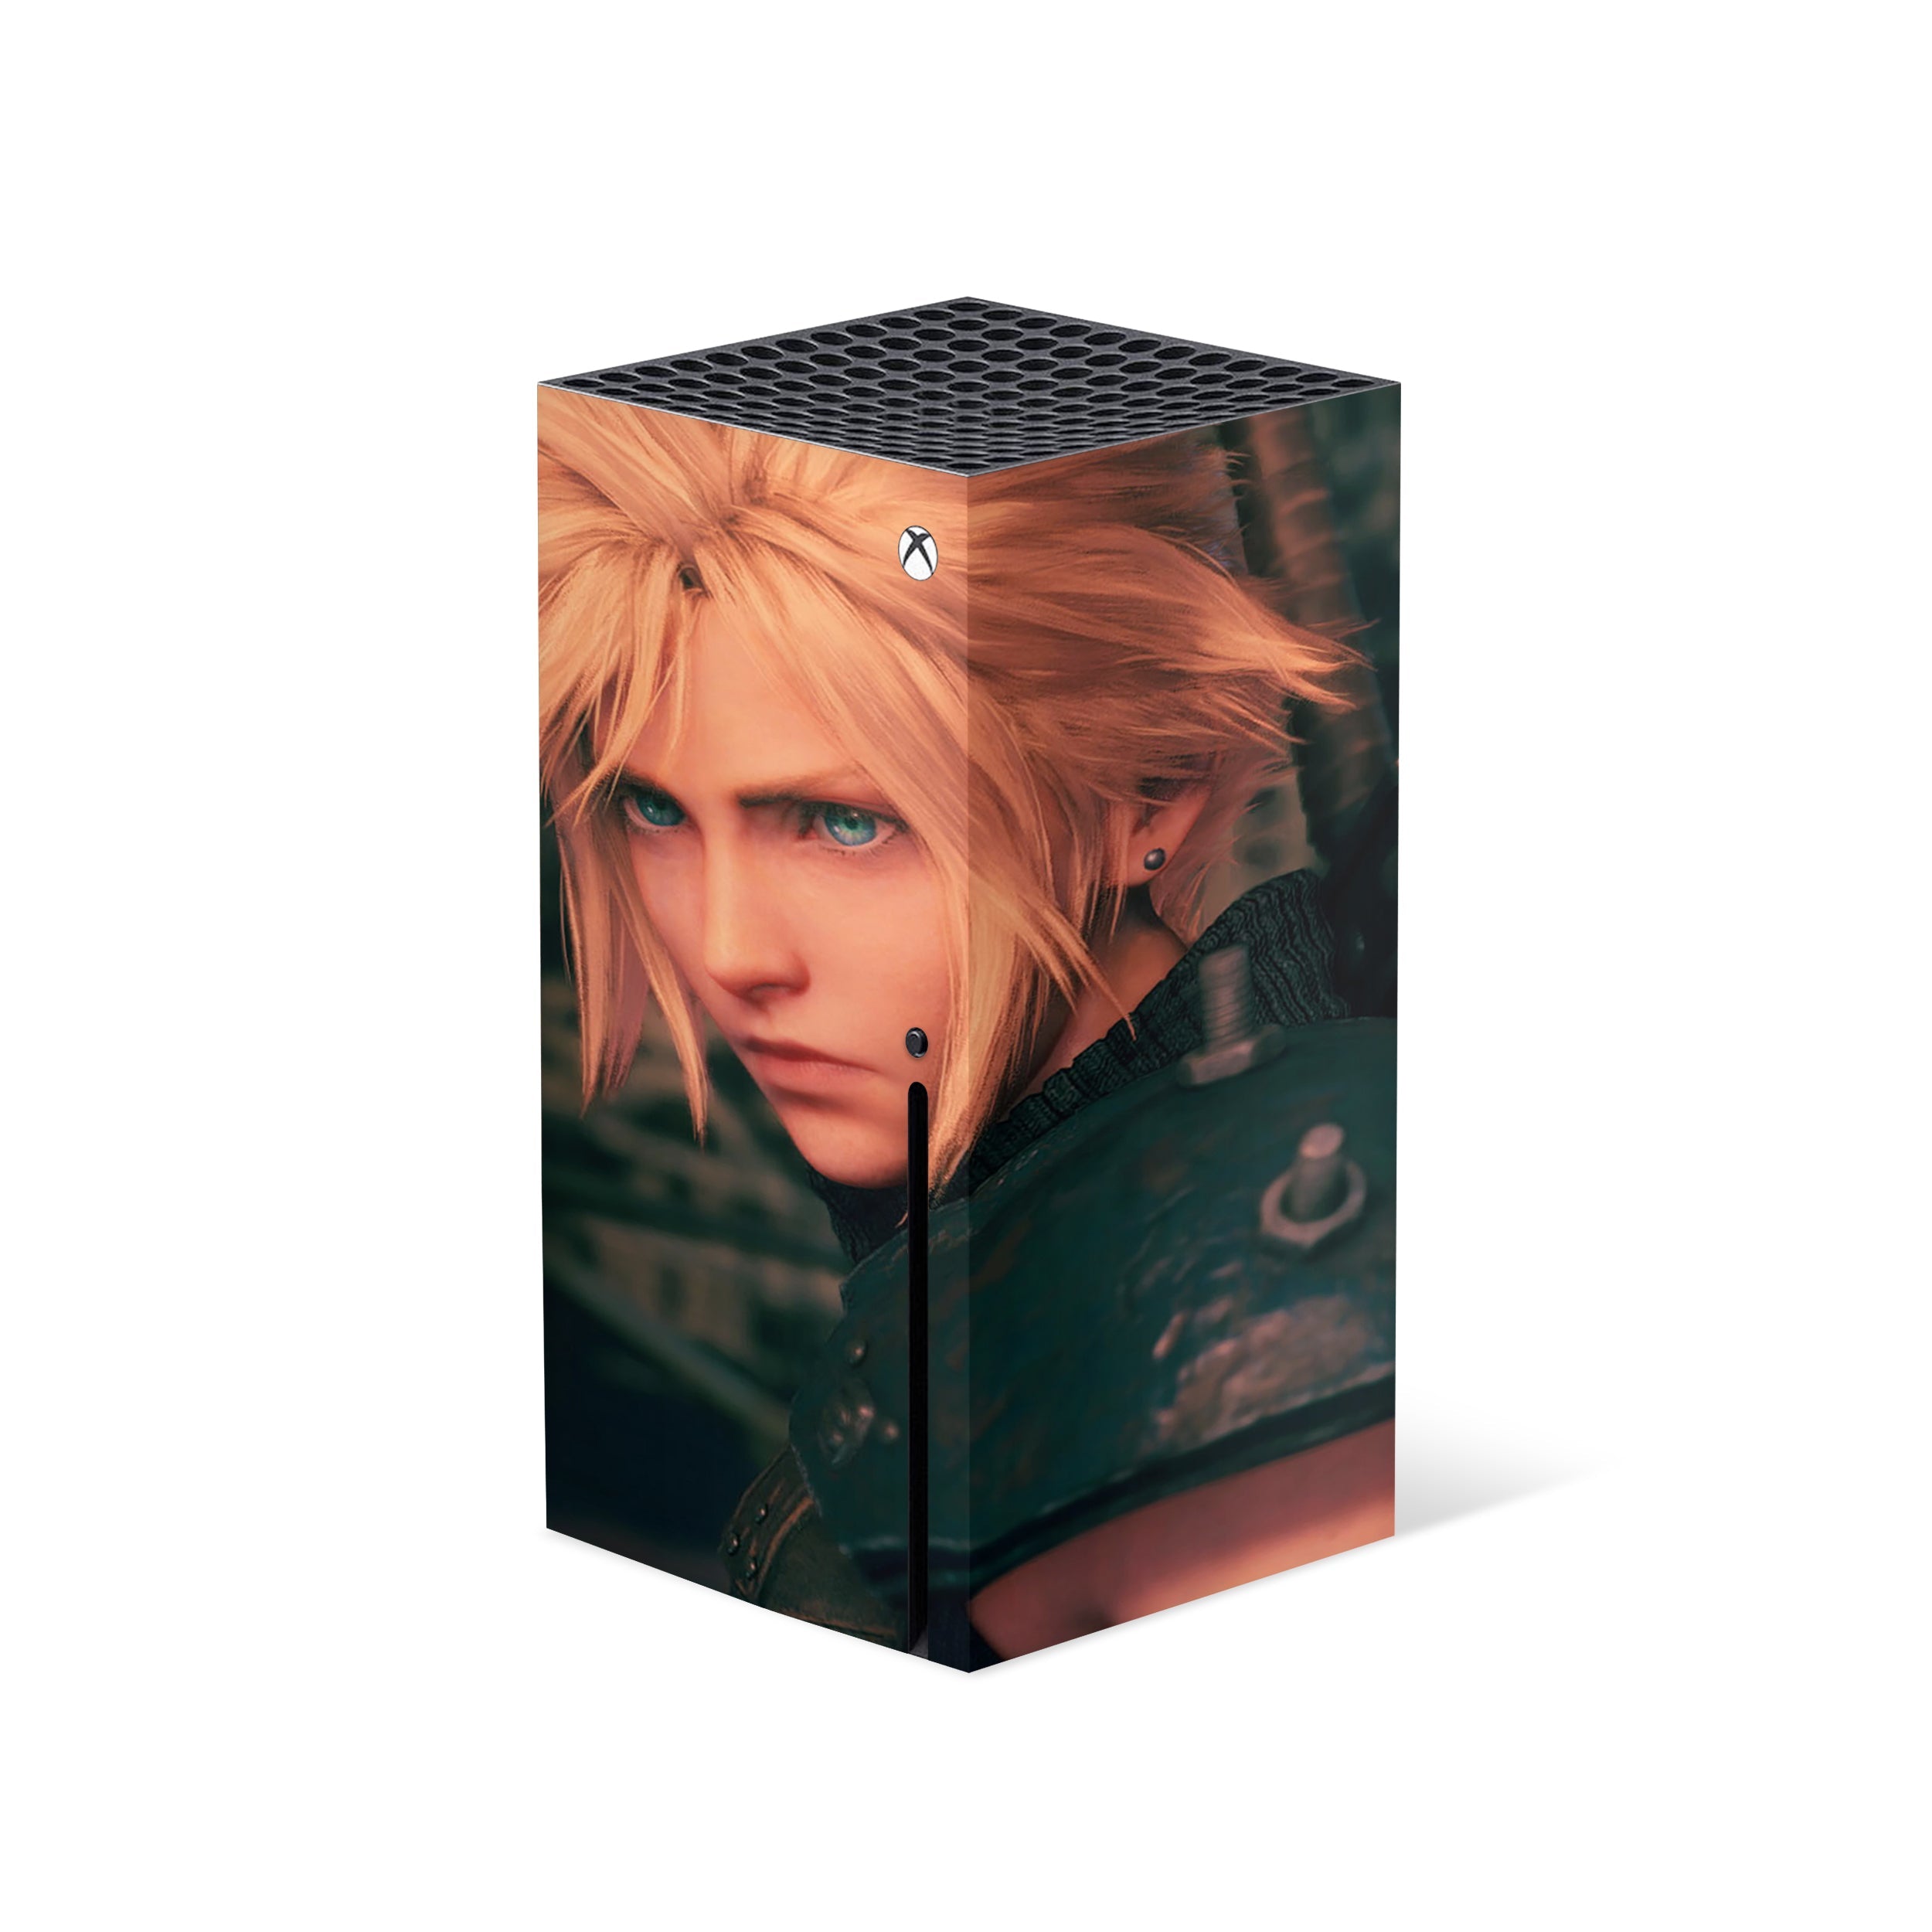 A video game skin featuring a Final Fantasy 7 Remake Cloud design for the Xbox Series X.